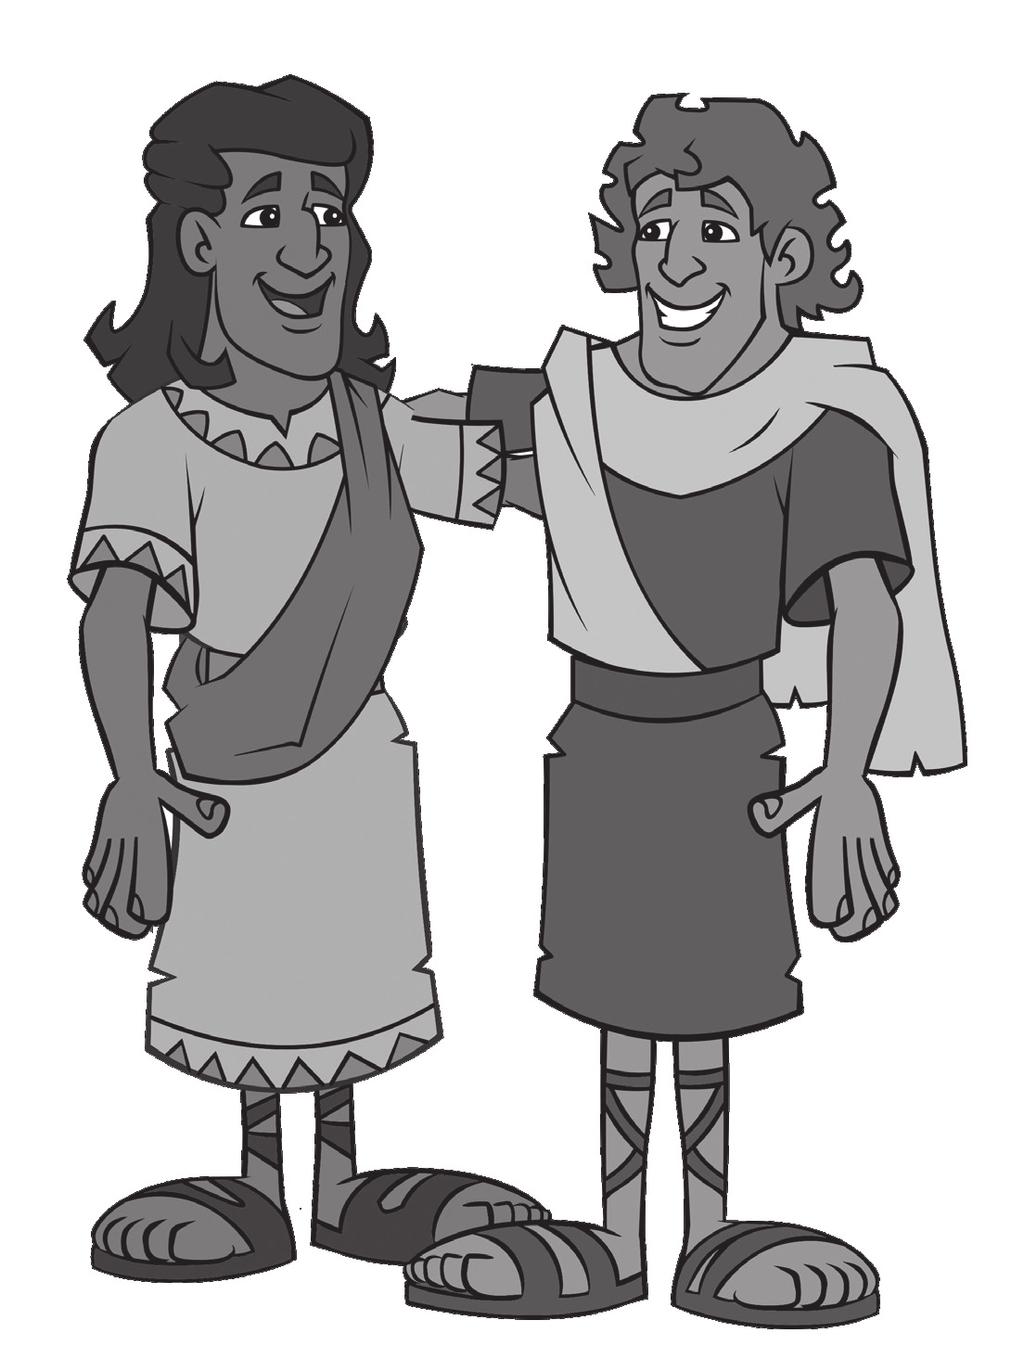 David and Jonathan The story of David and Jonathan is found in the Bible. David and Jonathan were best friends. David was the youngest son of a man named Jesse. Jonathan was the son of King Saul.